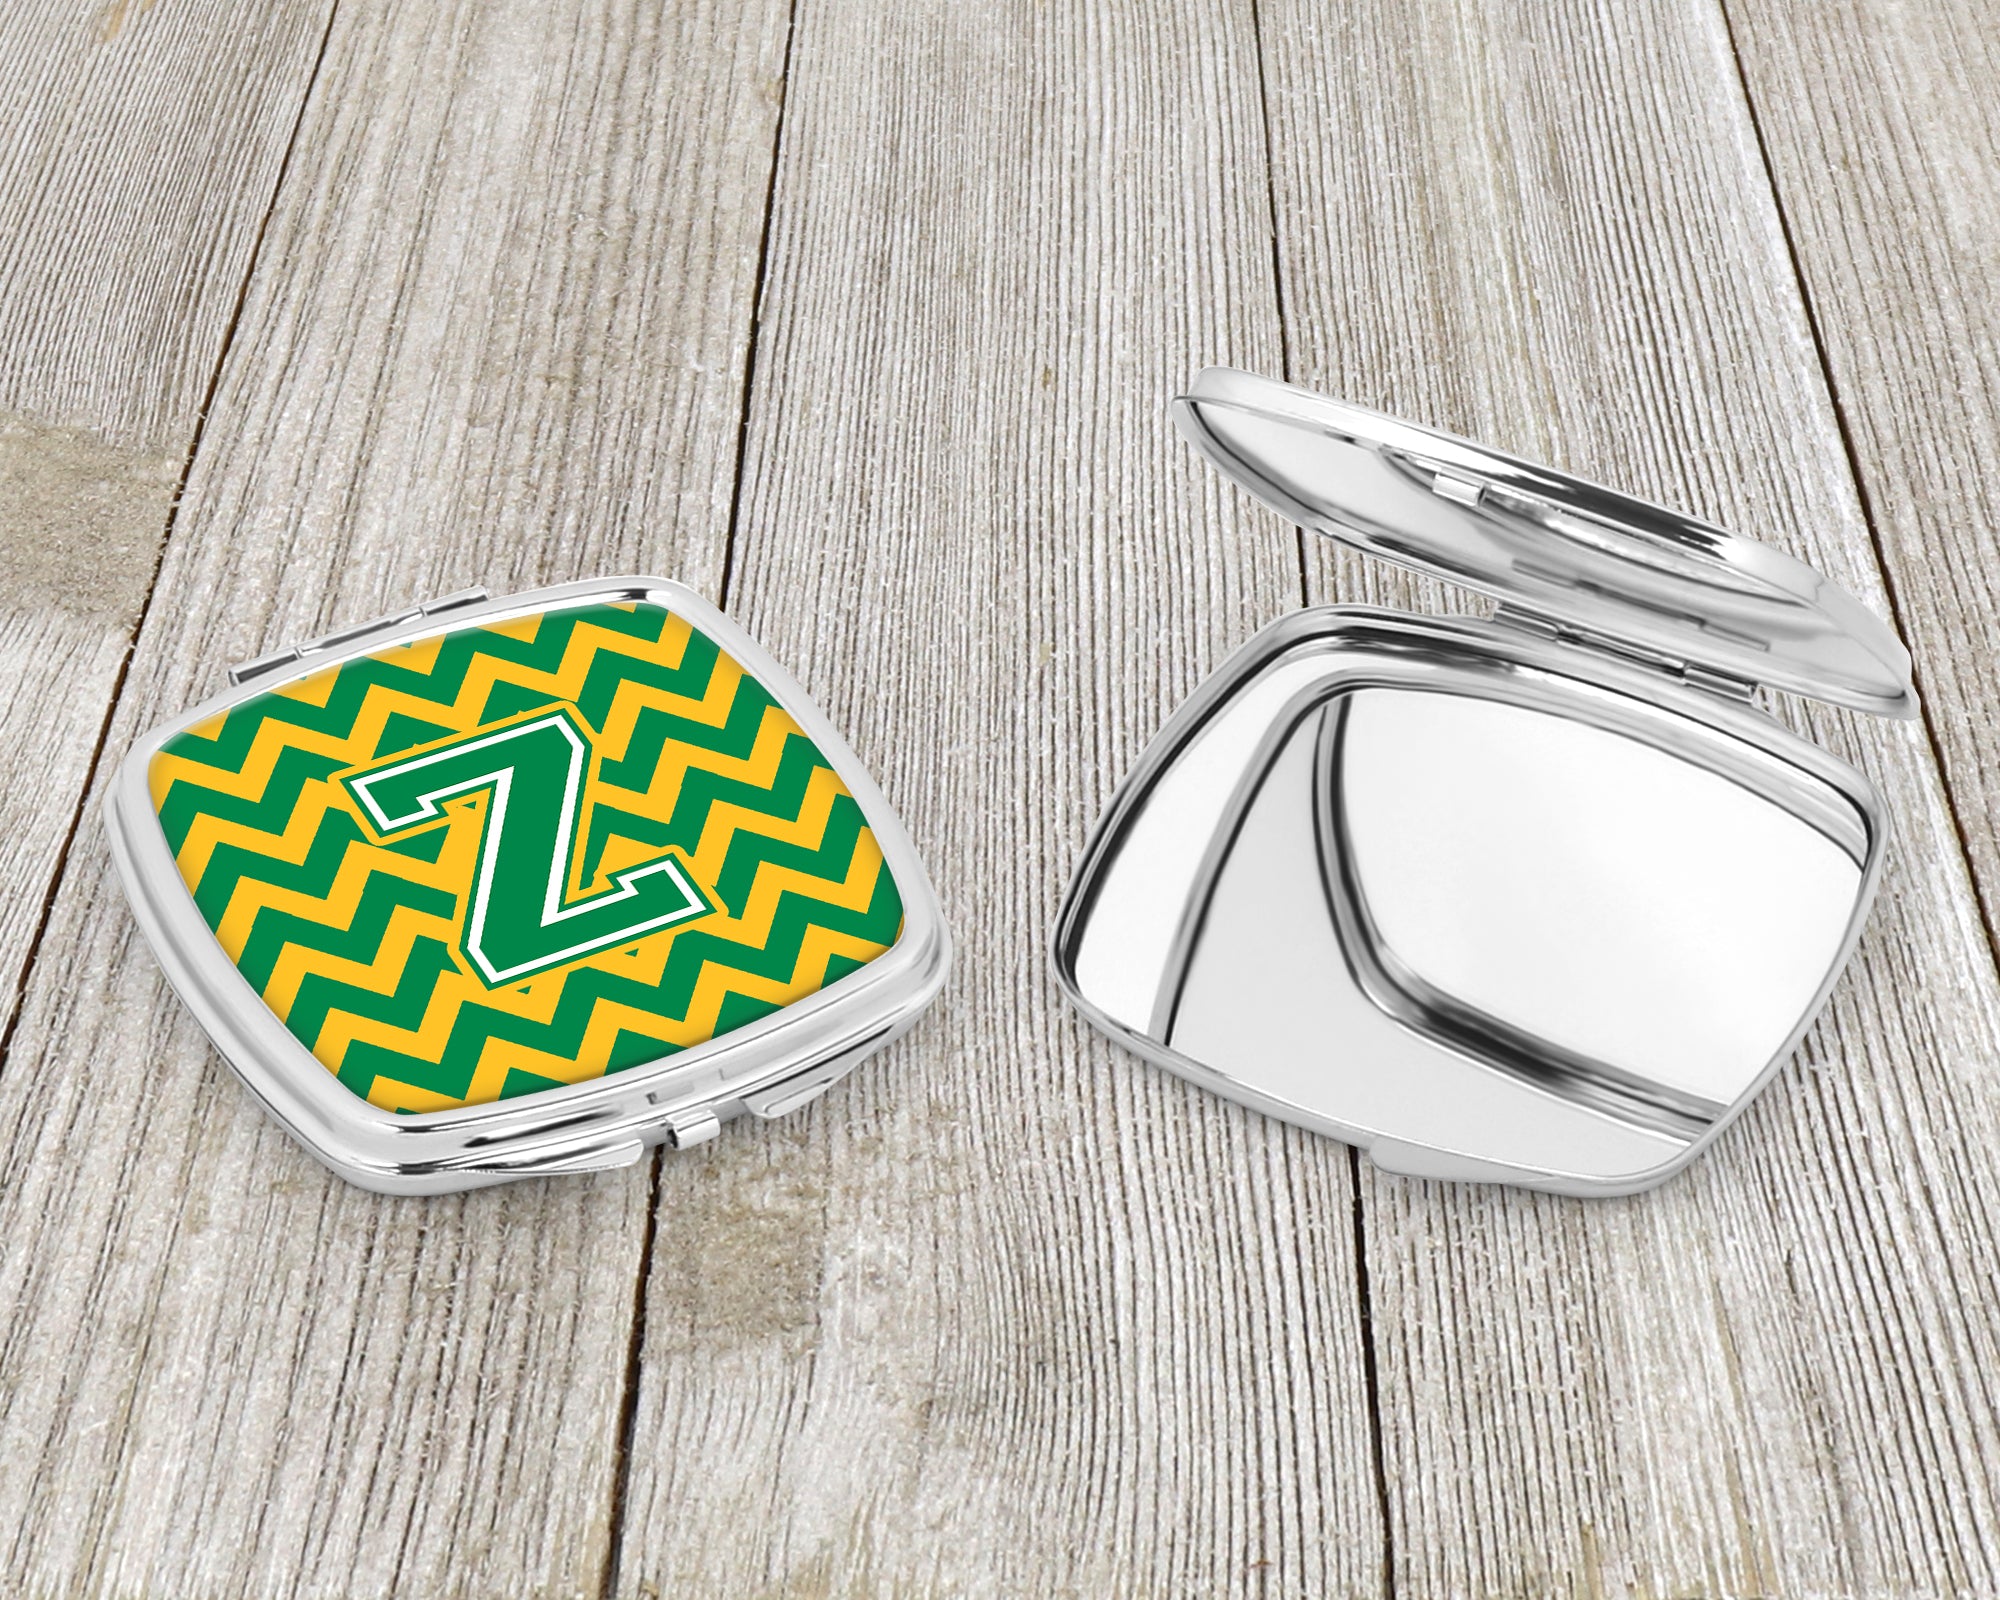 Letter Z Chevron Green and Gold Compact Mirror CJ1059-ZSCM